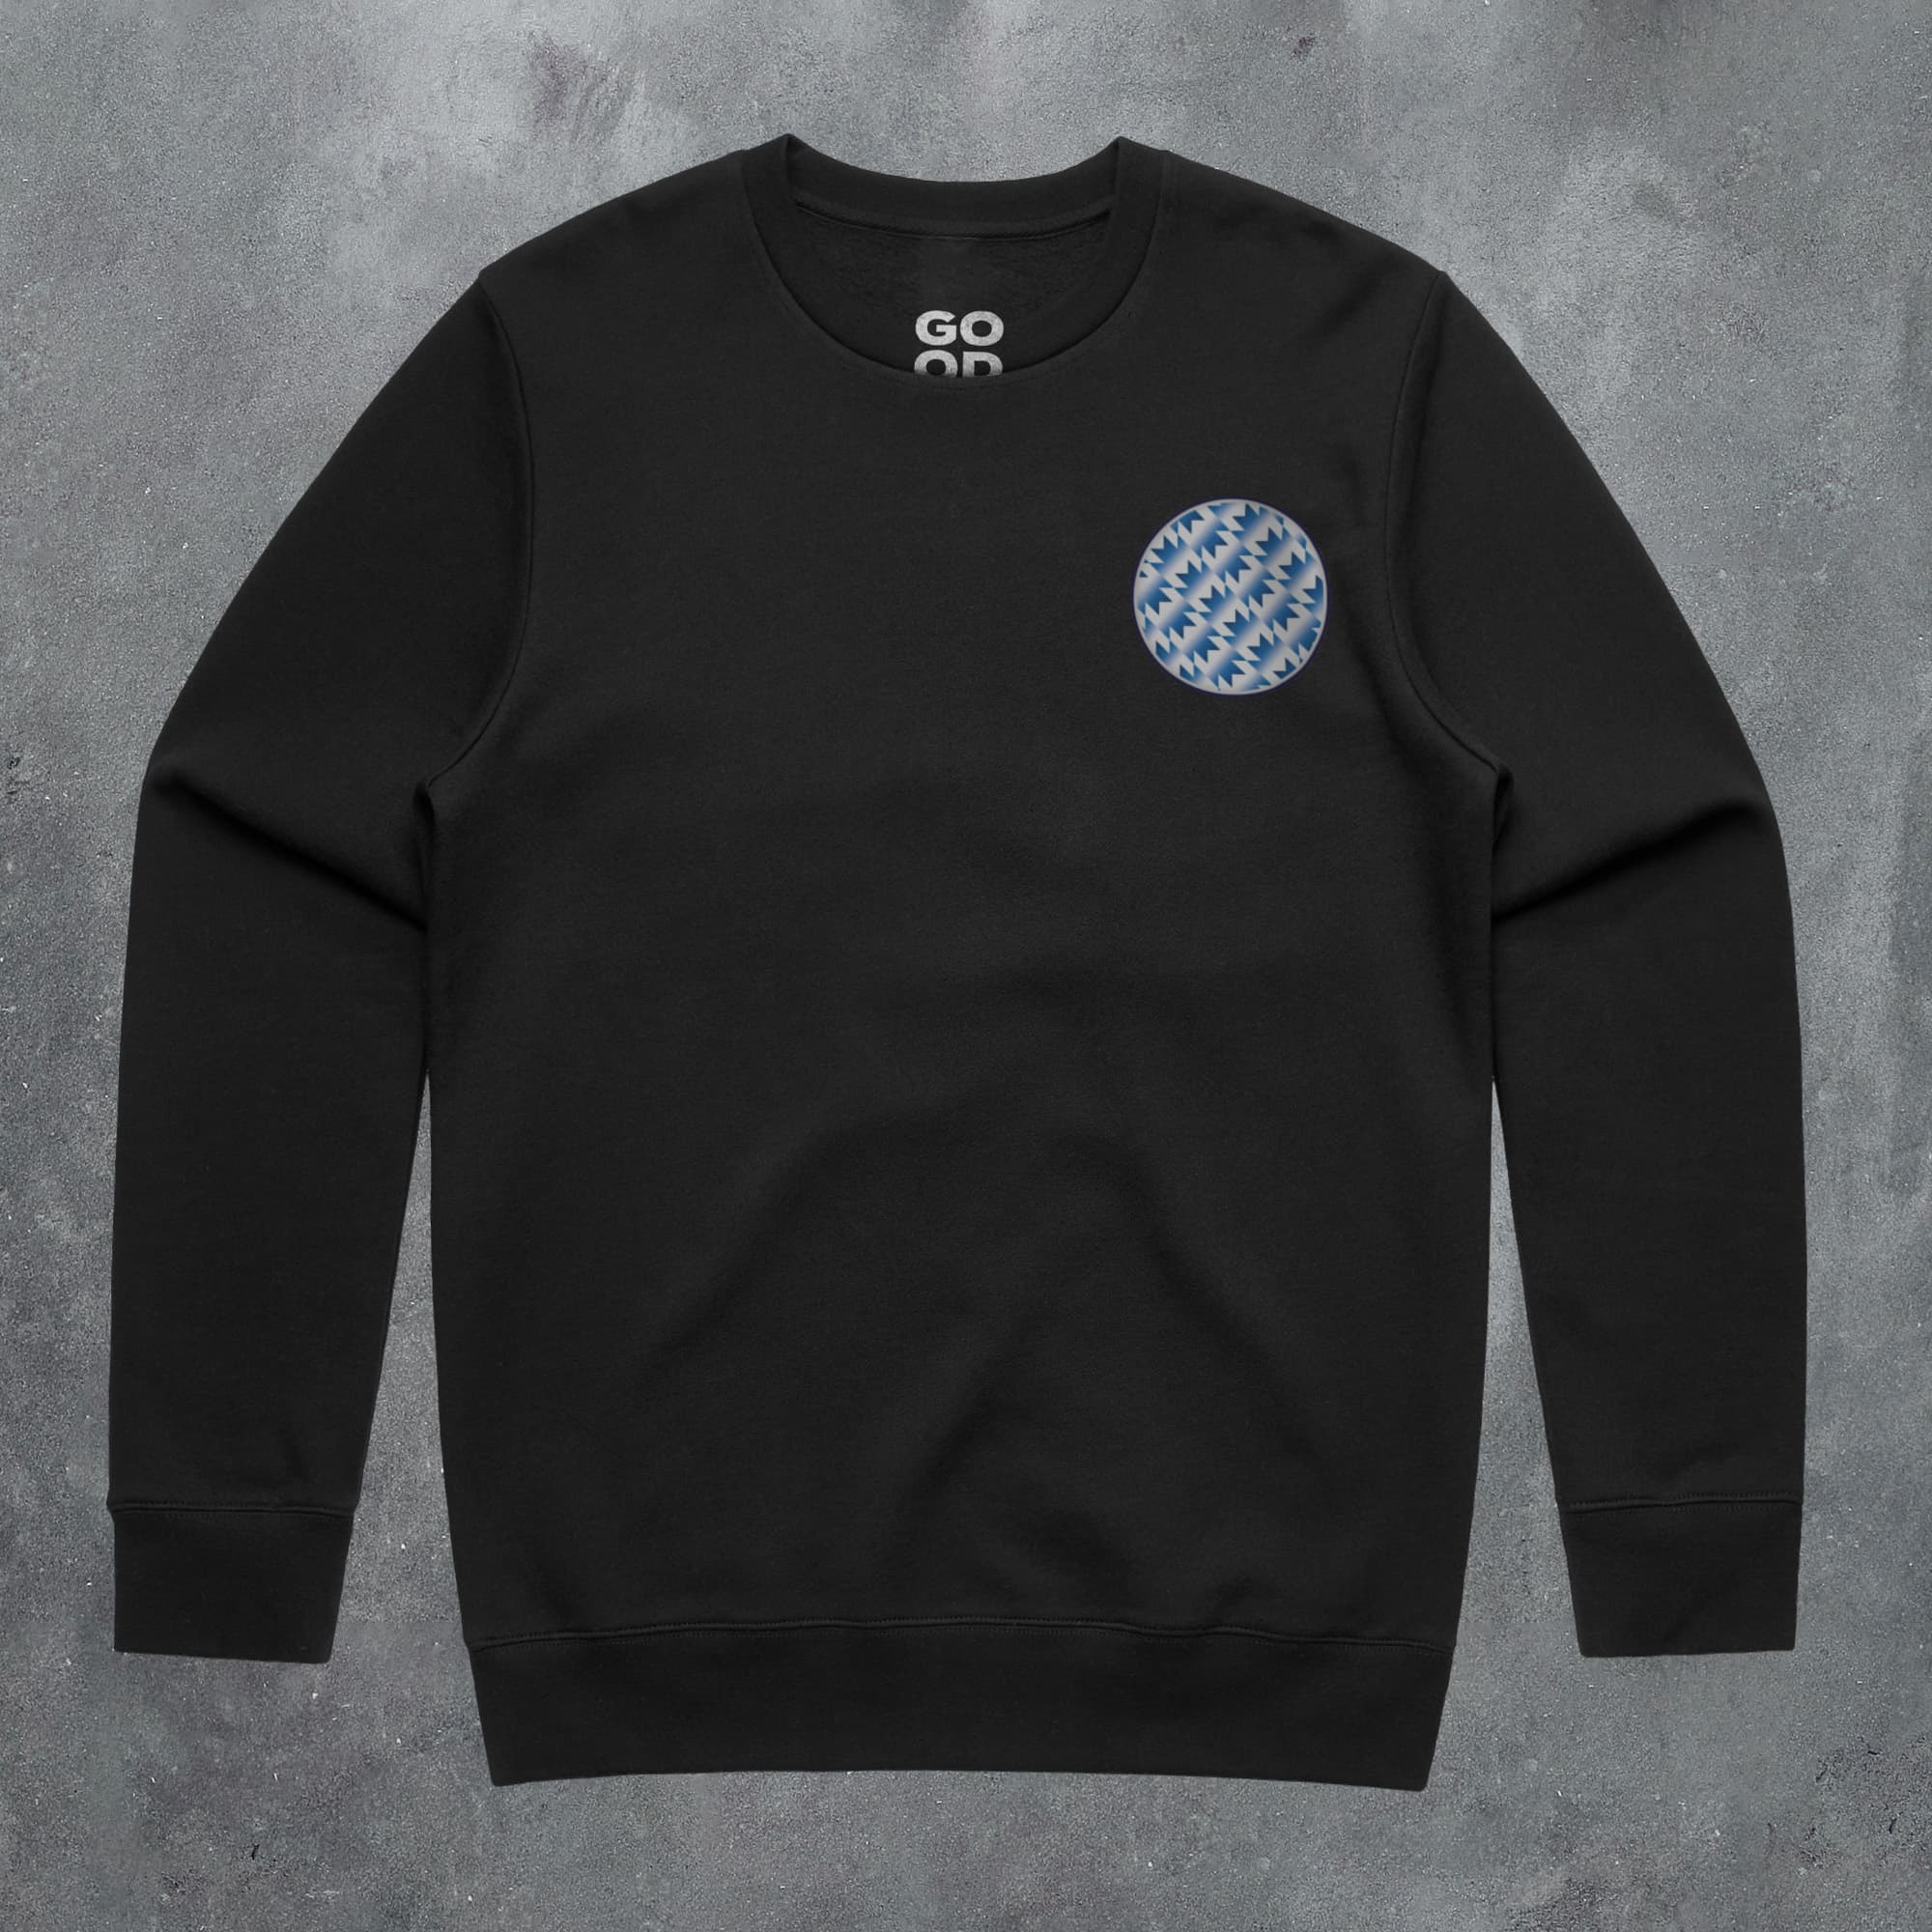 a black sweatshirt with a blue and white pattern on the chest